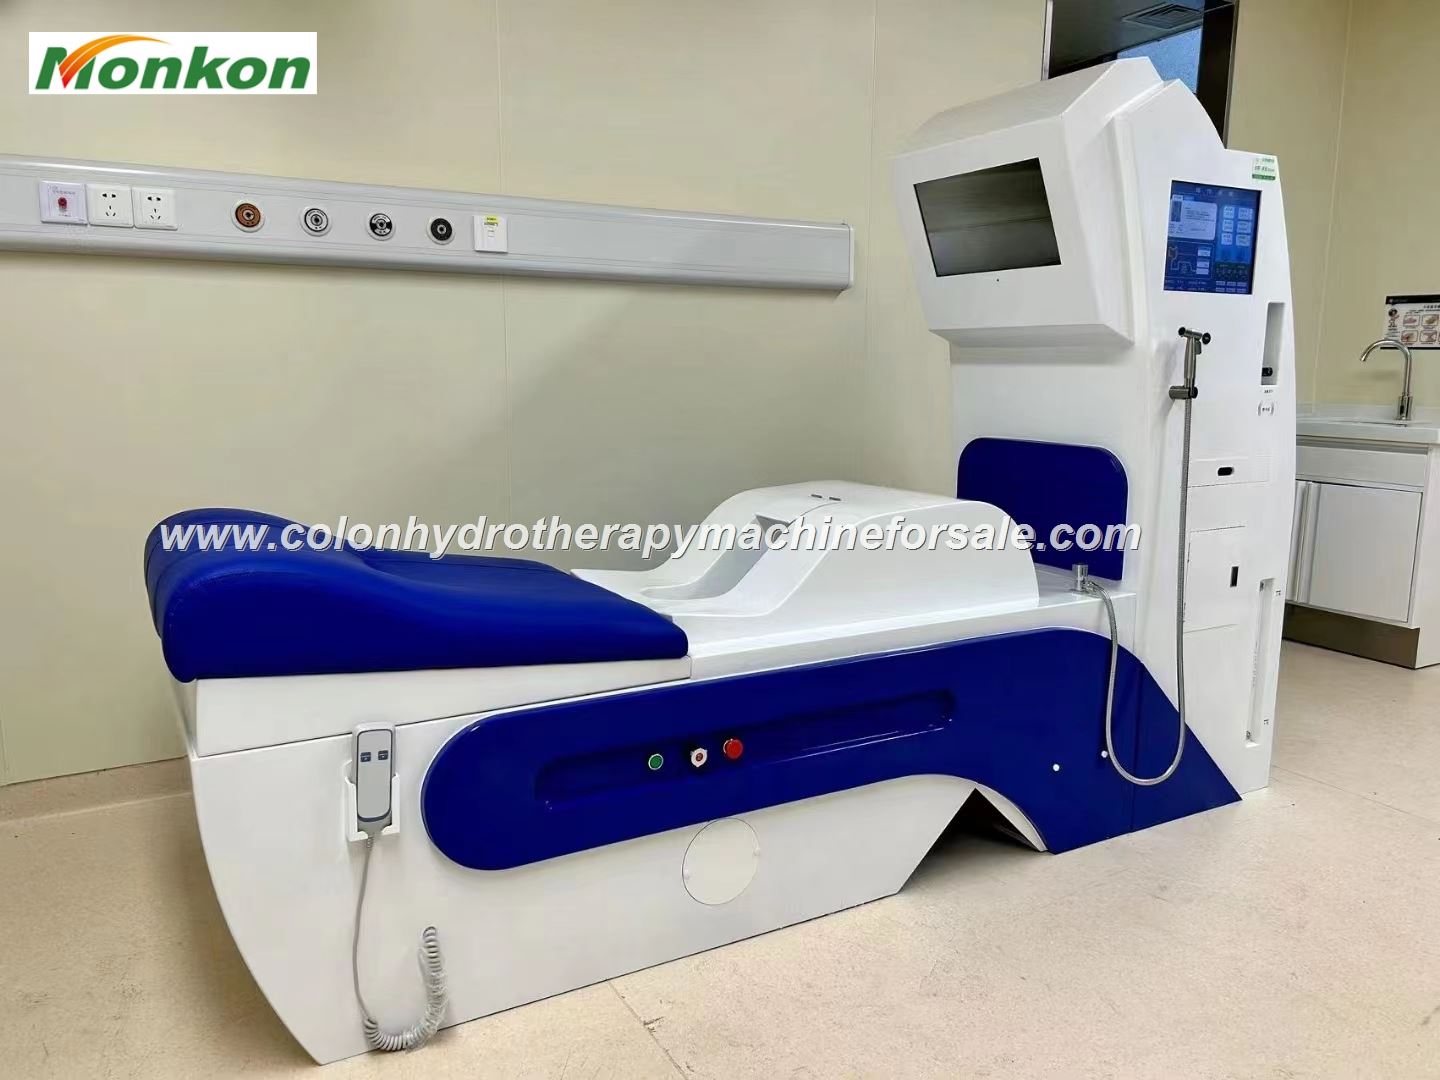 MAIKONG Colonic Cleanse Machines